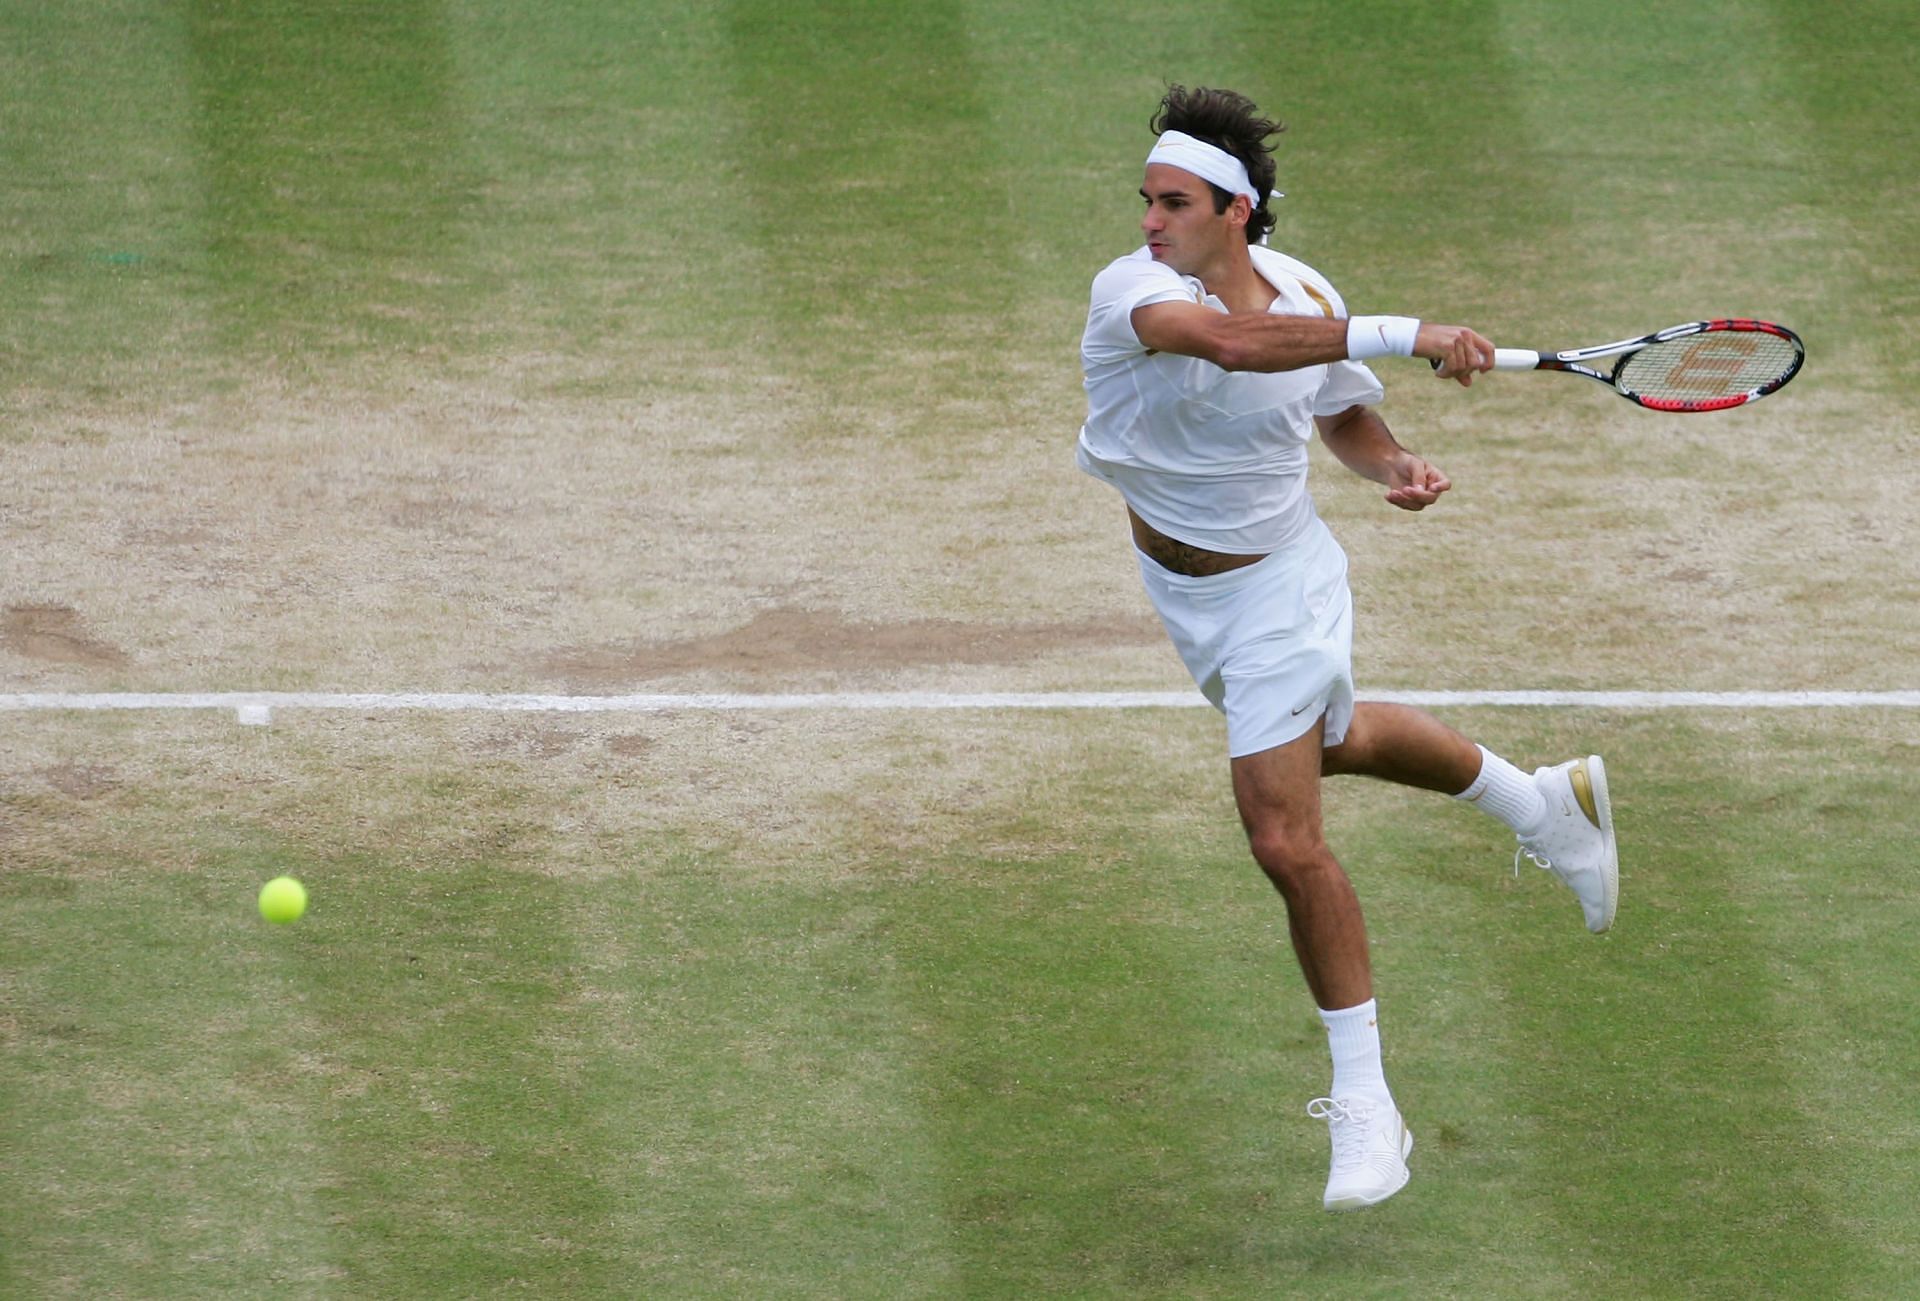 Between 2003 and 2008, Roger Federer won 65 consecutive matches on grass